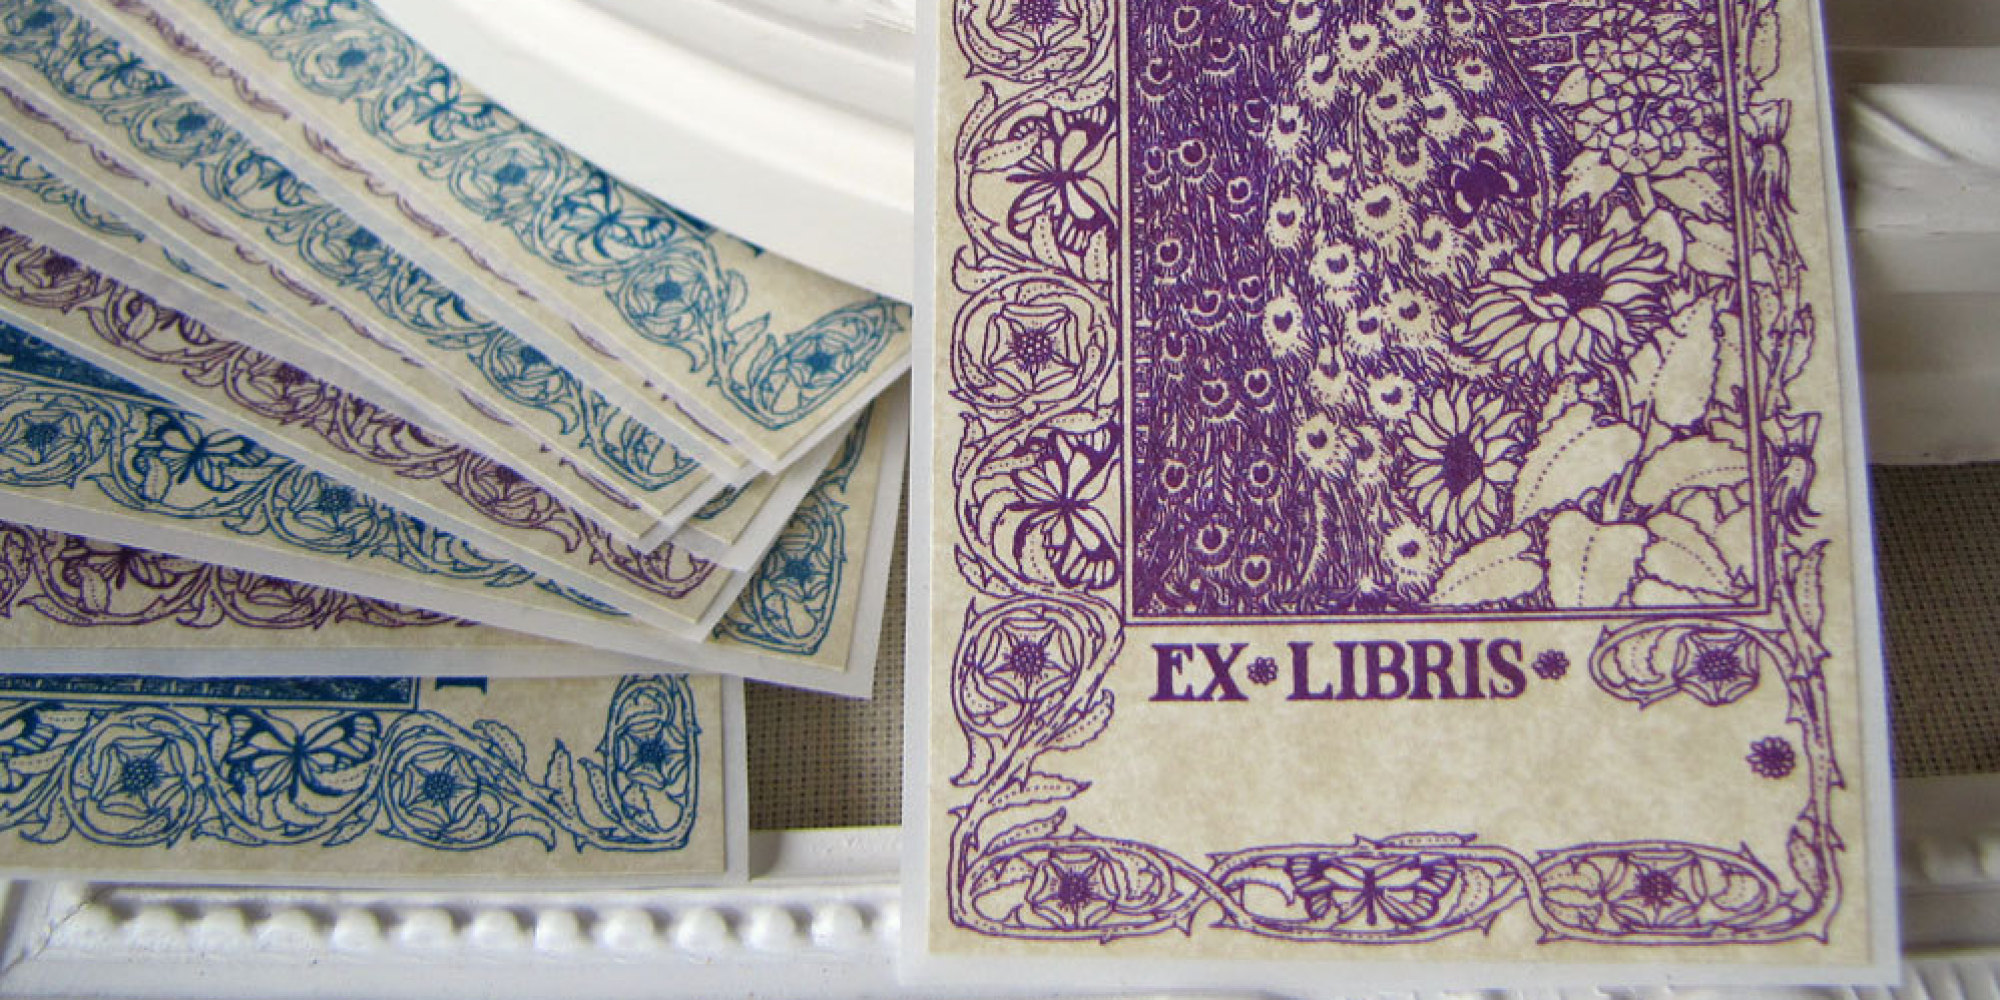 23 Gorgeous Bookplates That Will Give Your Books Serious Style | HuffPost